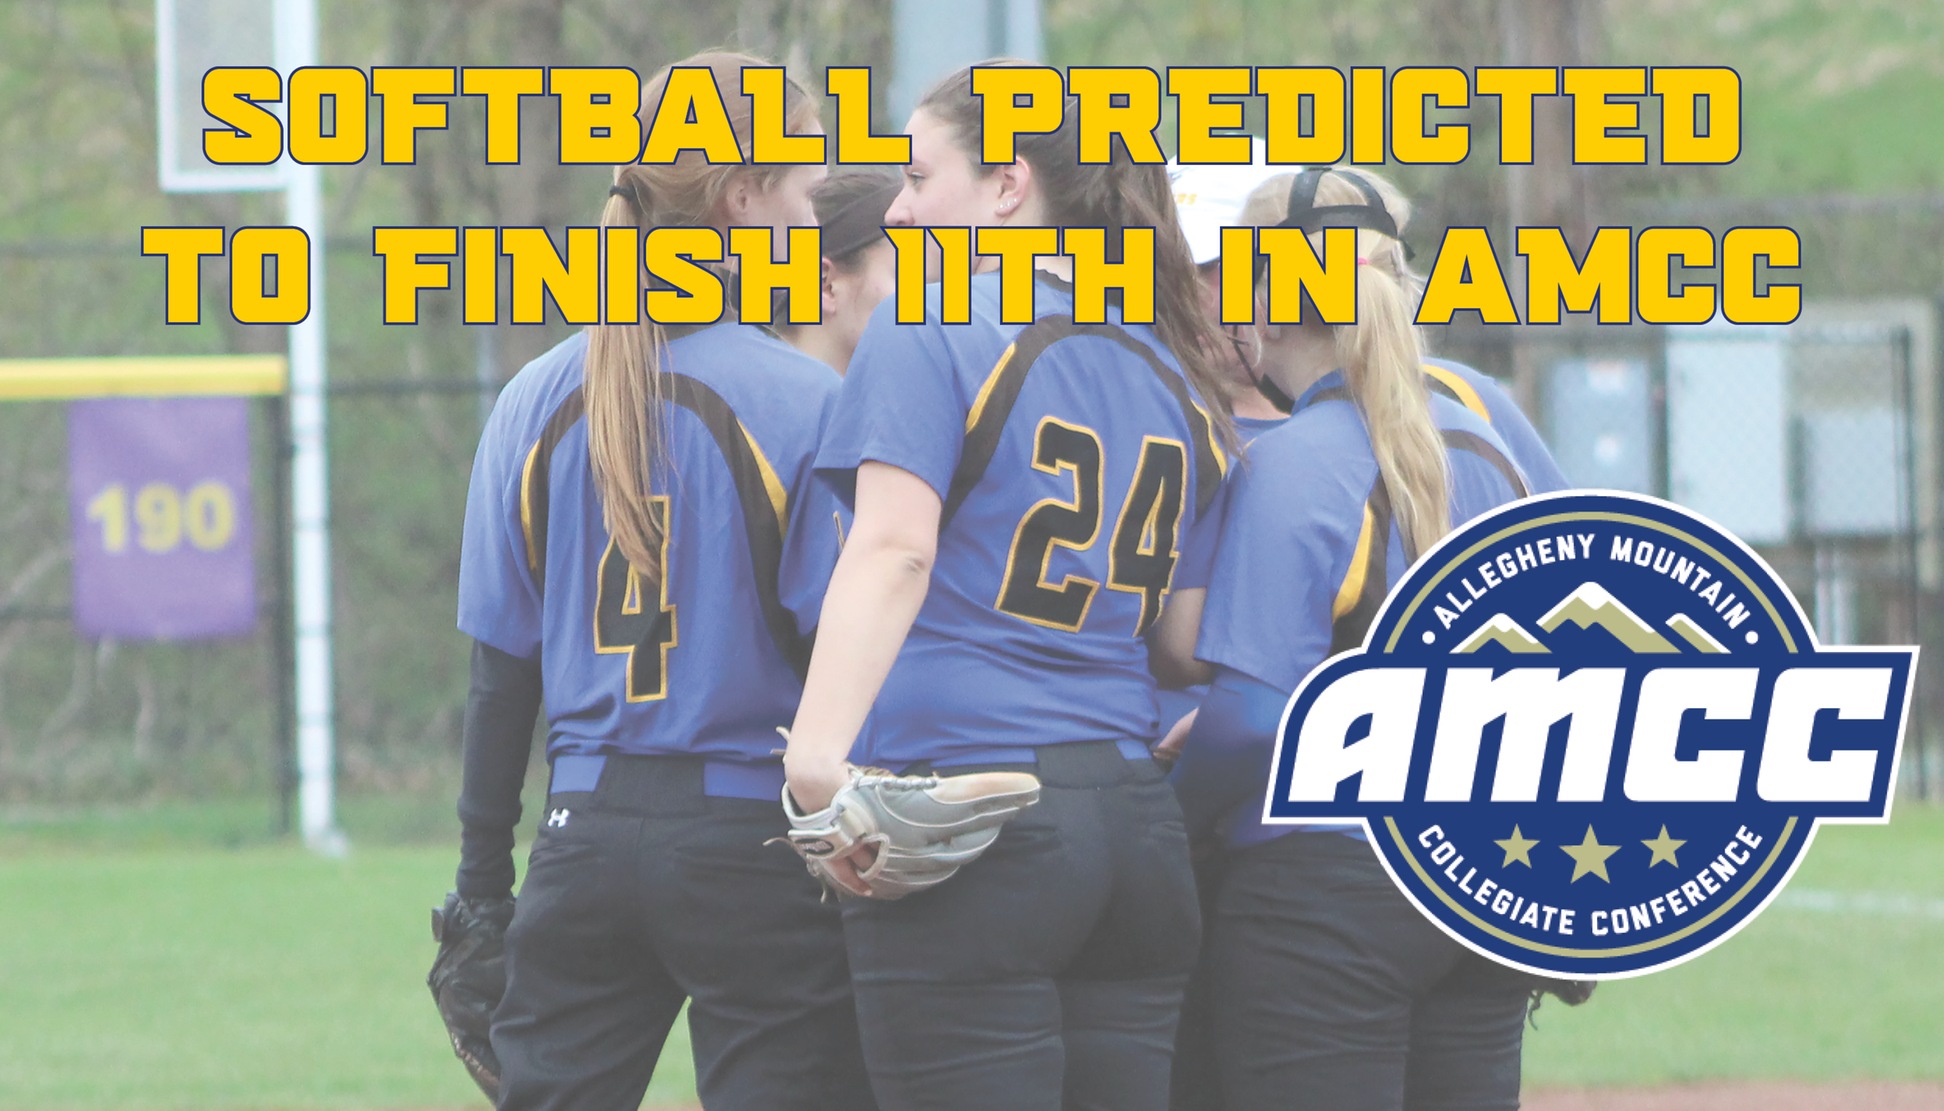 Softball team predicted to finish 11th in AMCC